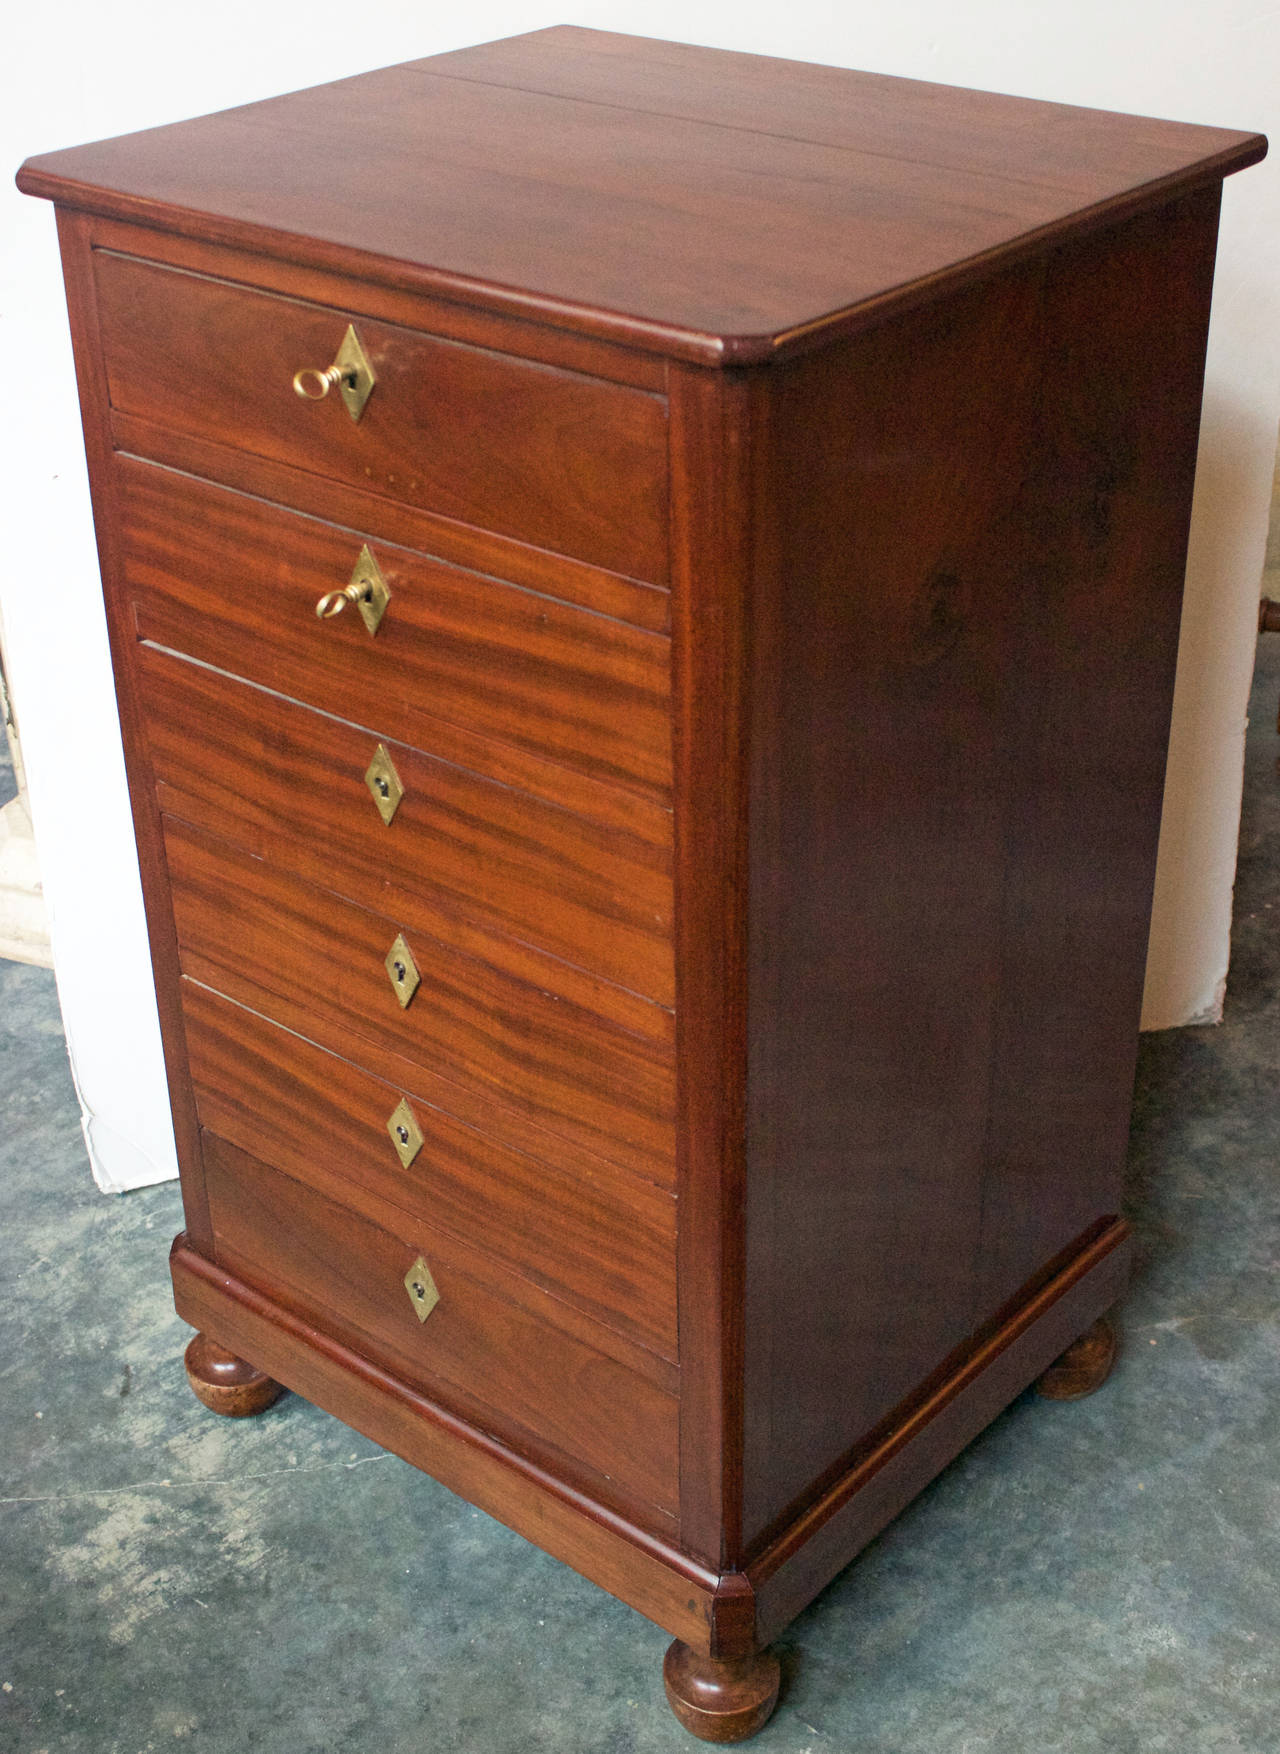 Very handsome chiffonier in solid and veneer mahogany from the French Restauration period. Six drawers having each a brass keyhole and a working lock and key. Rest on four baluster shaped feet.